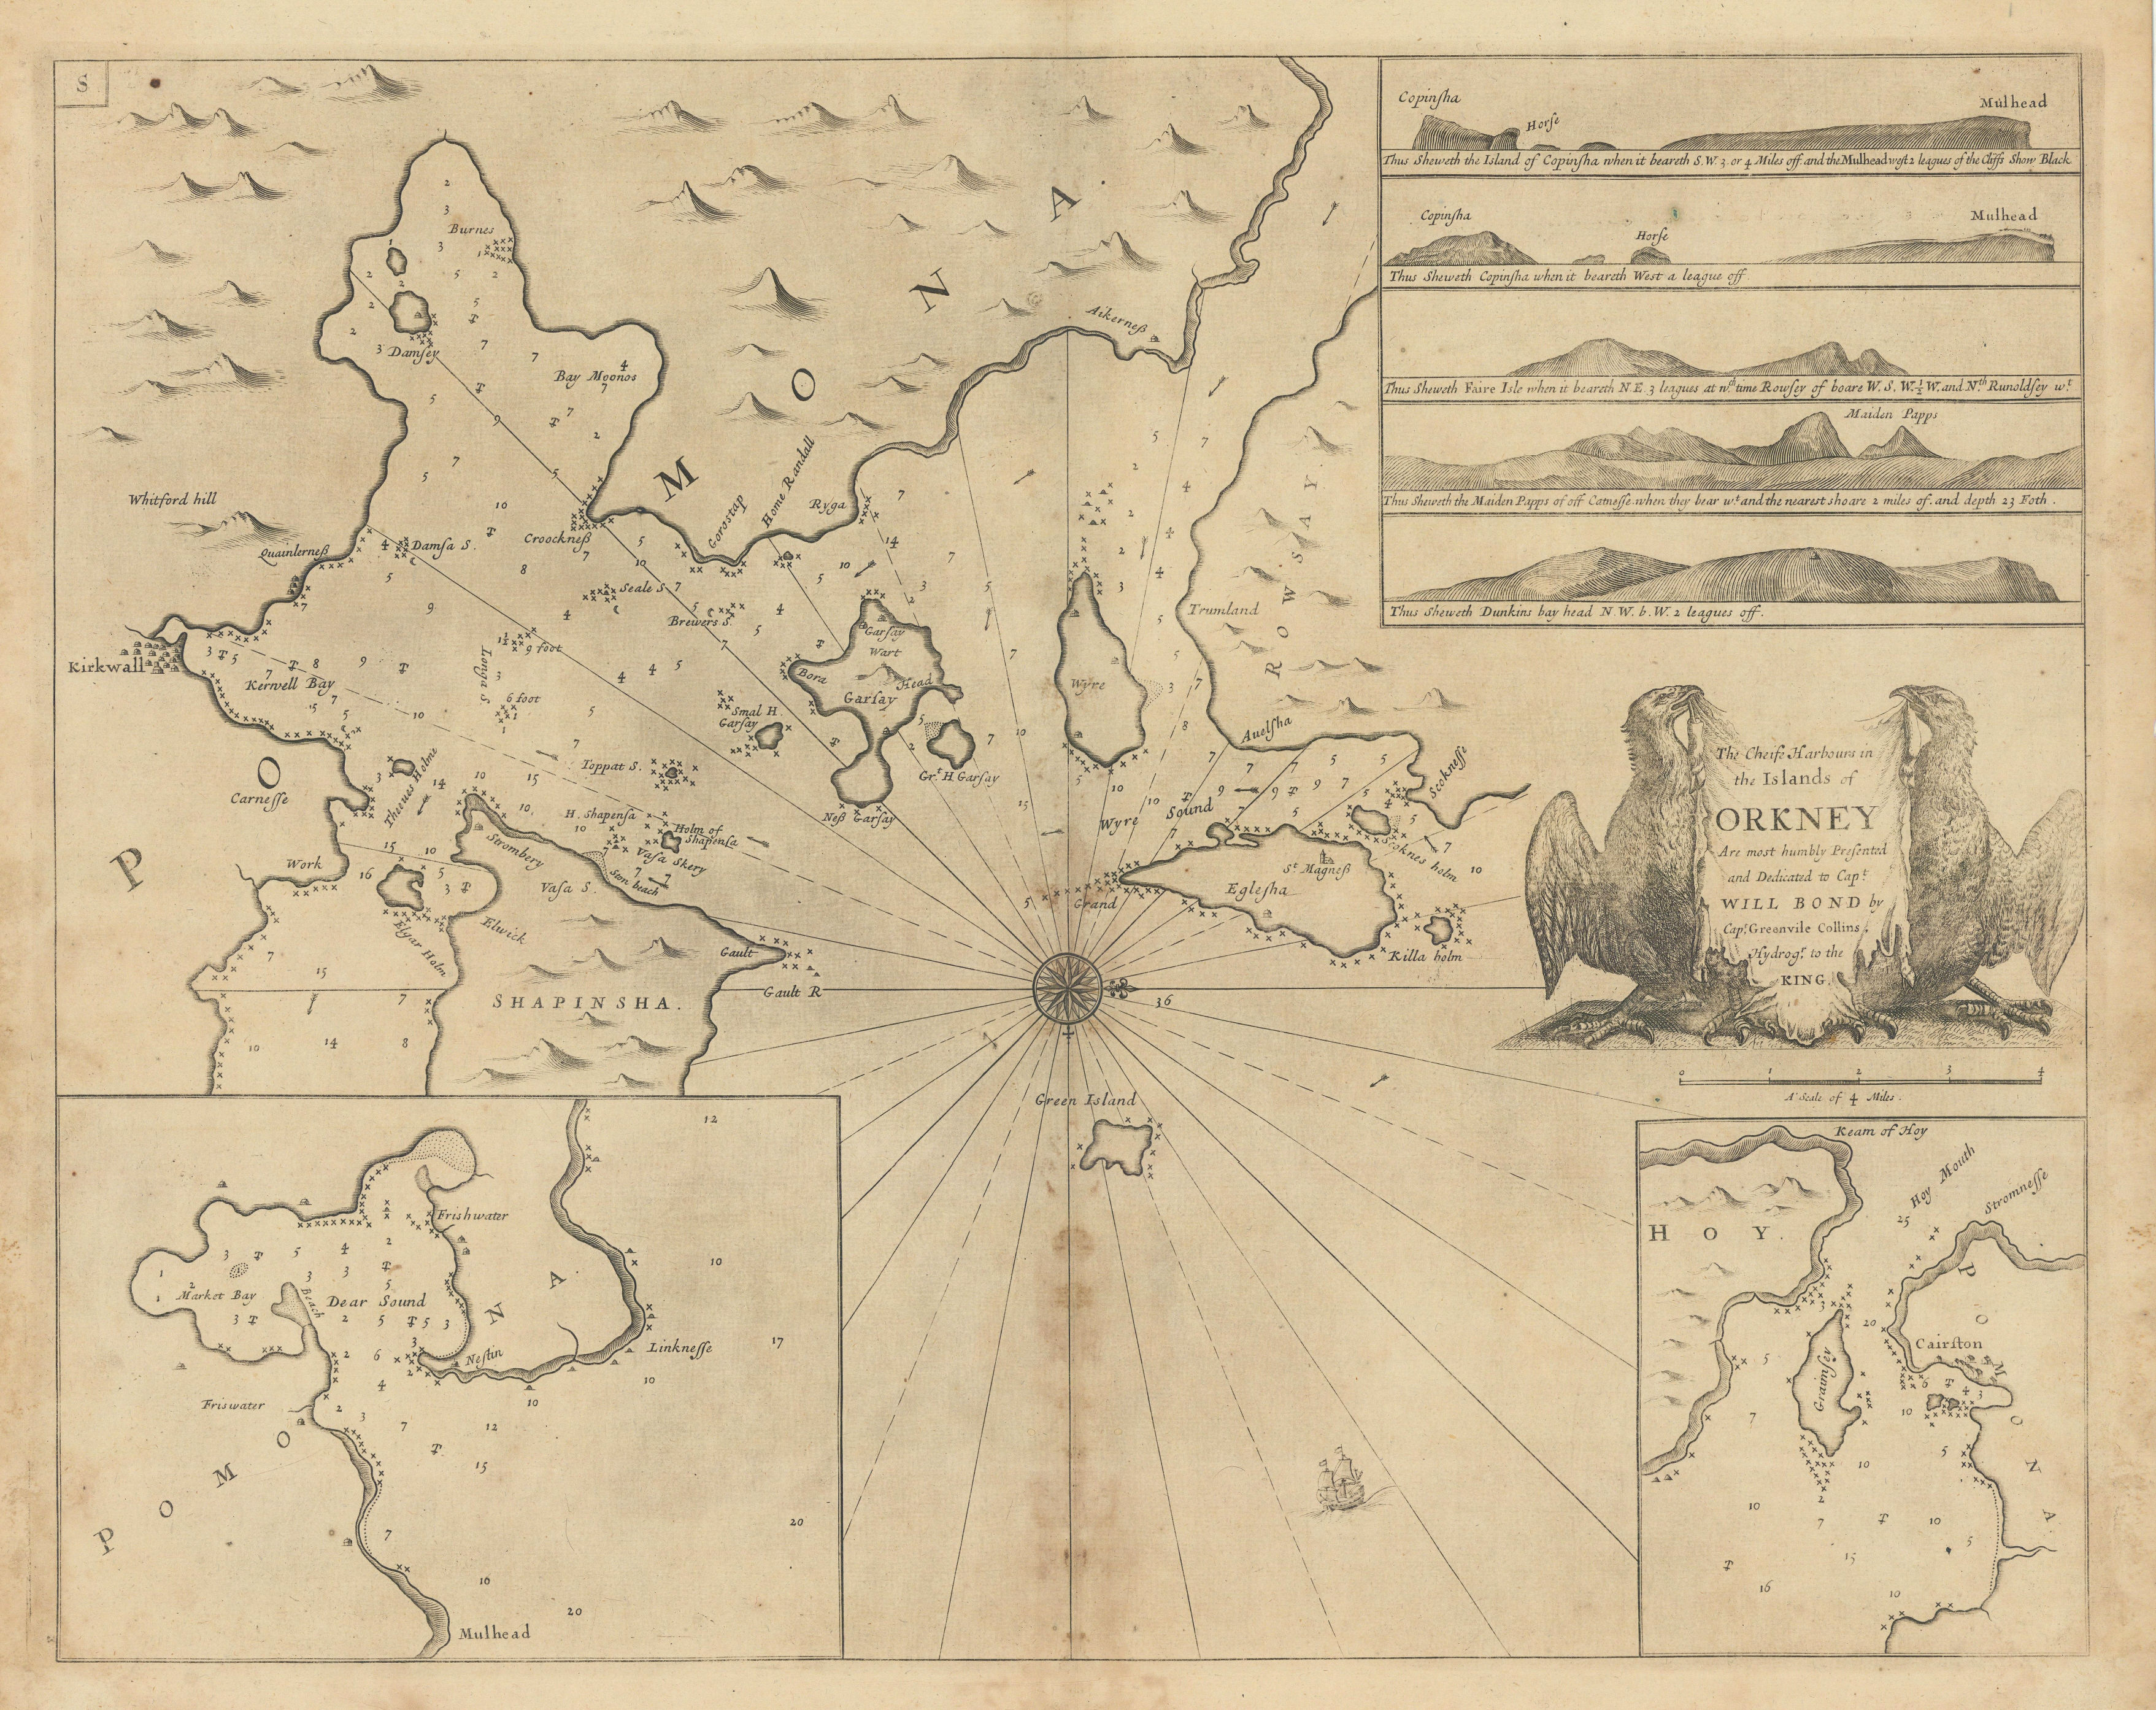 Associate Product Chiefe Harbours in the Islands of Orkney sea chart. Kirkwall.COLLINS 1723 map